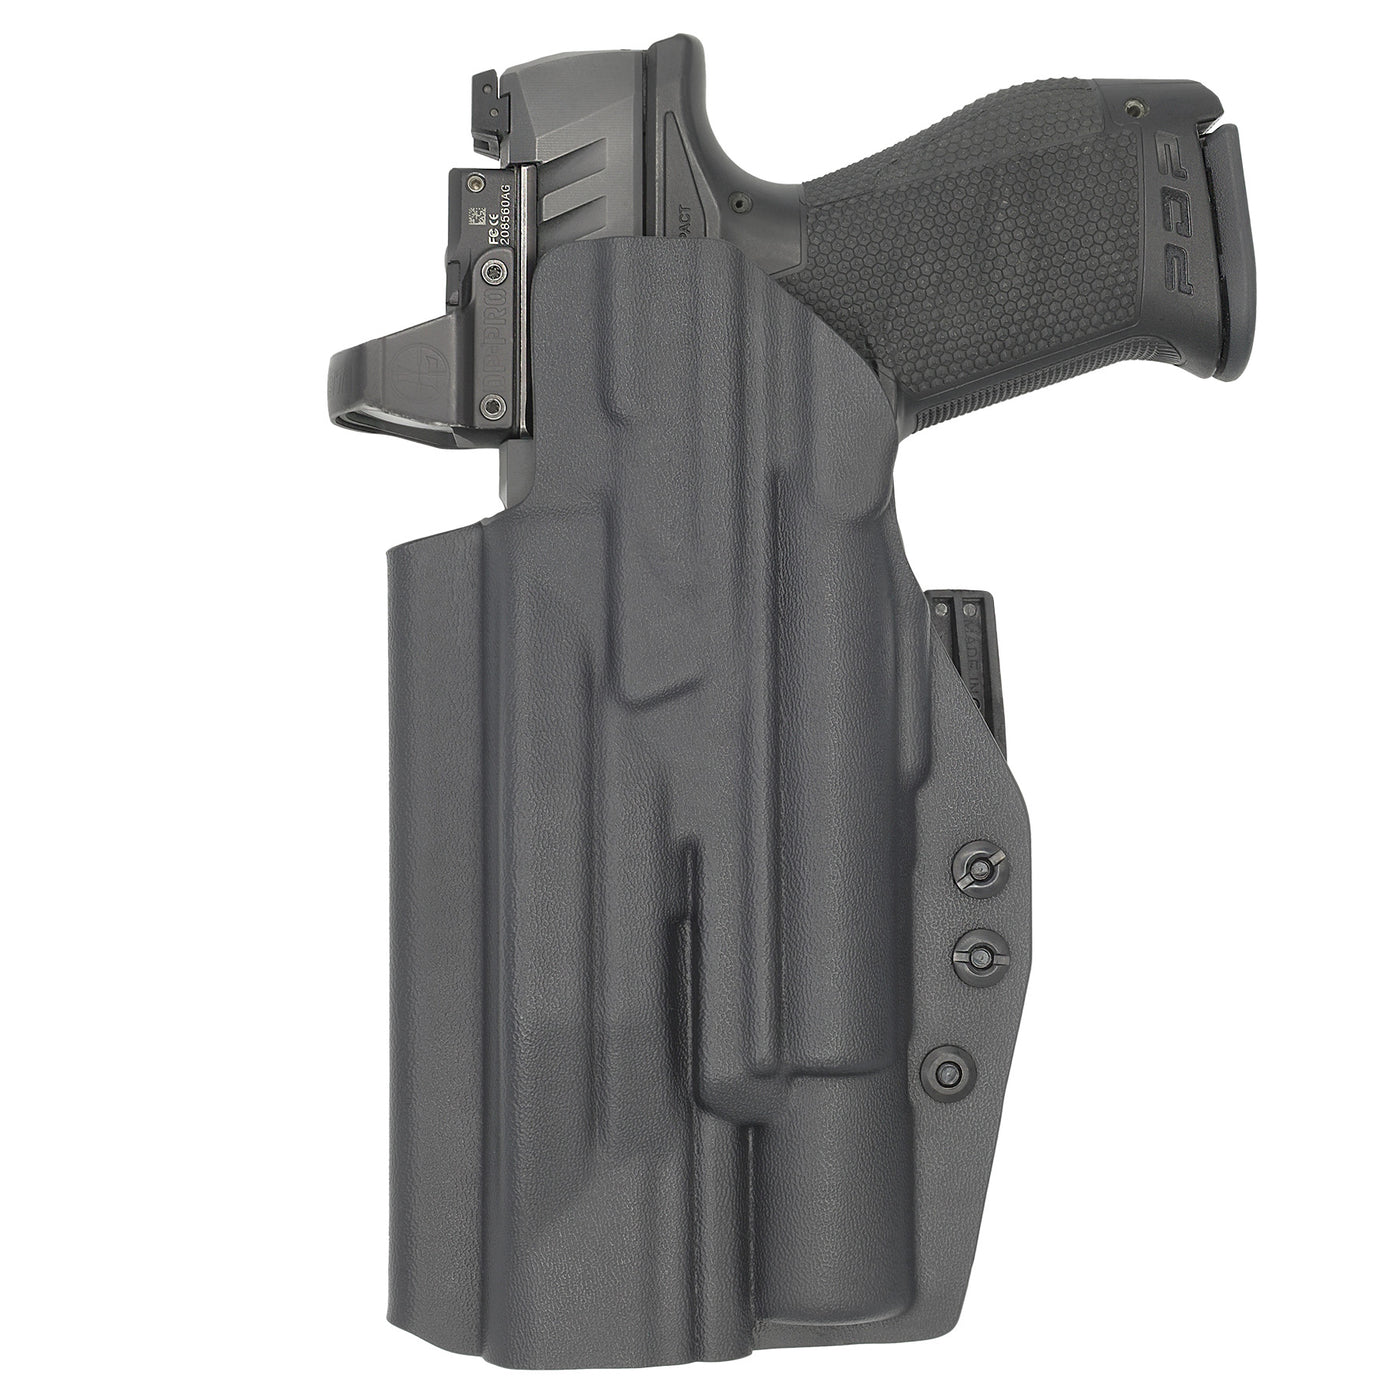 C&G Holsters quickship IWB Tactical ALPHA UPGRADE Beretta Surefire X300 in holstered position back view